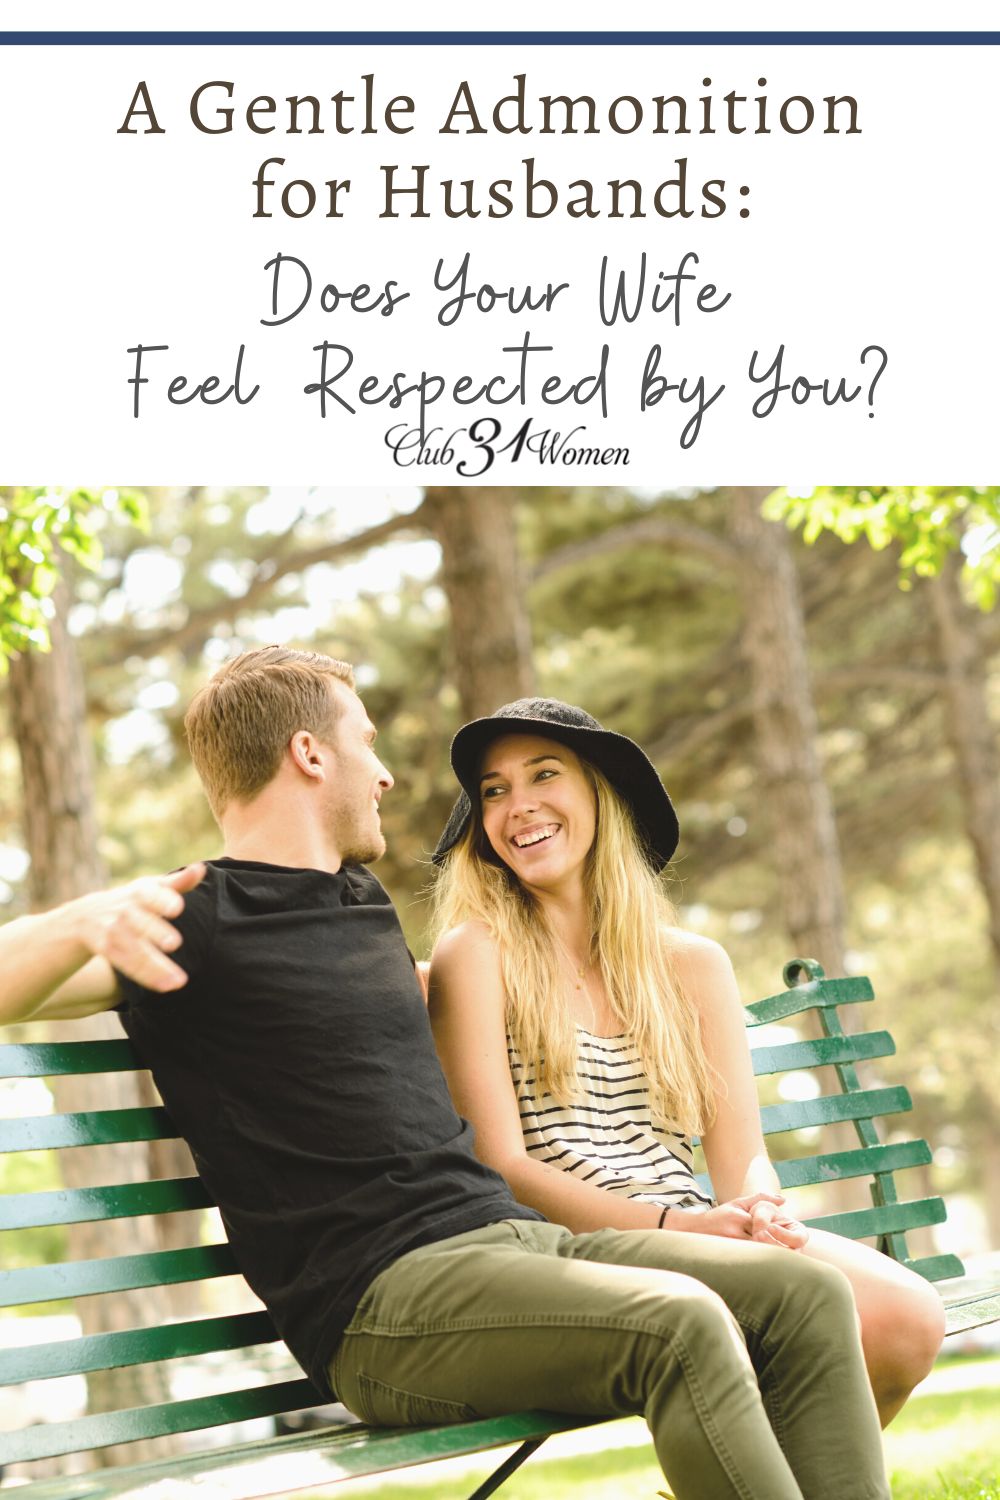 A Gentle Admonition for Husbands: Does Your Wife Feel Respected by You? via @Club31Women